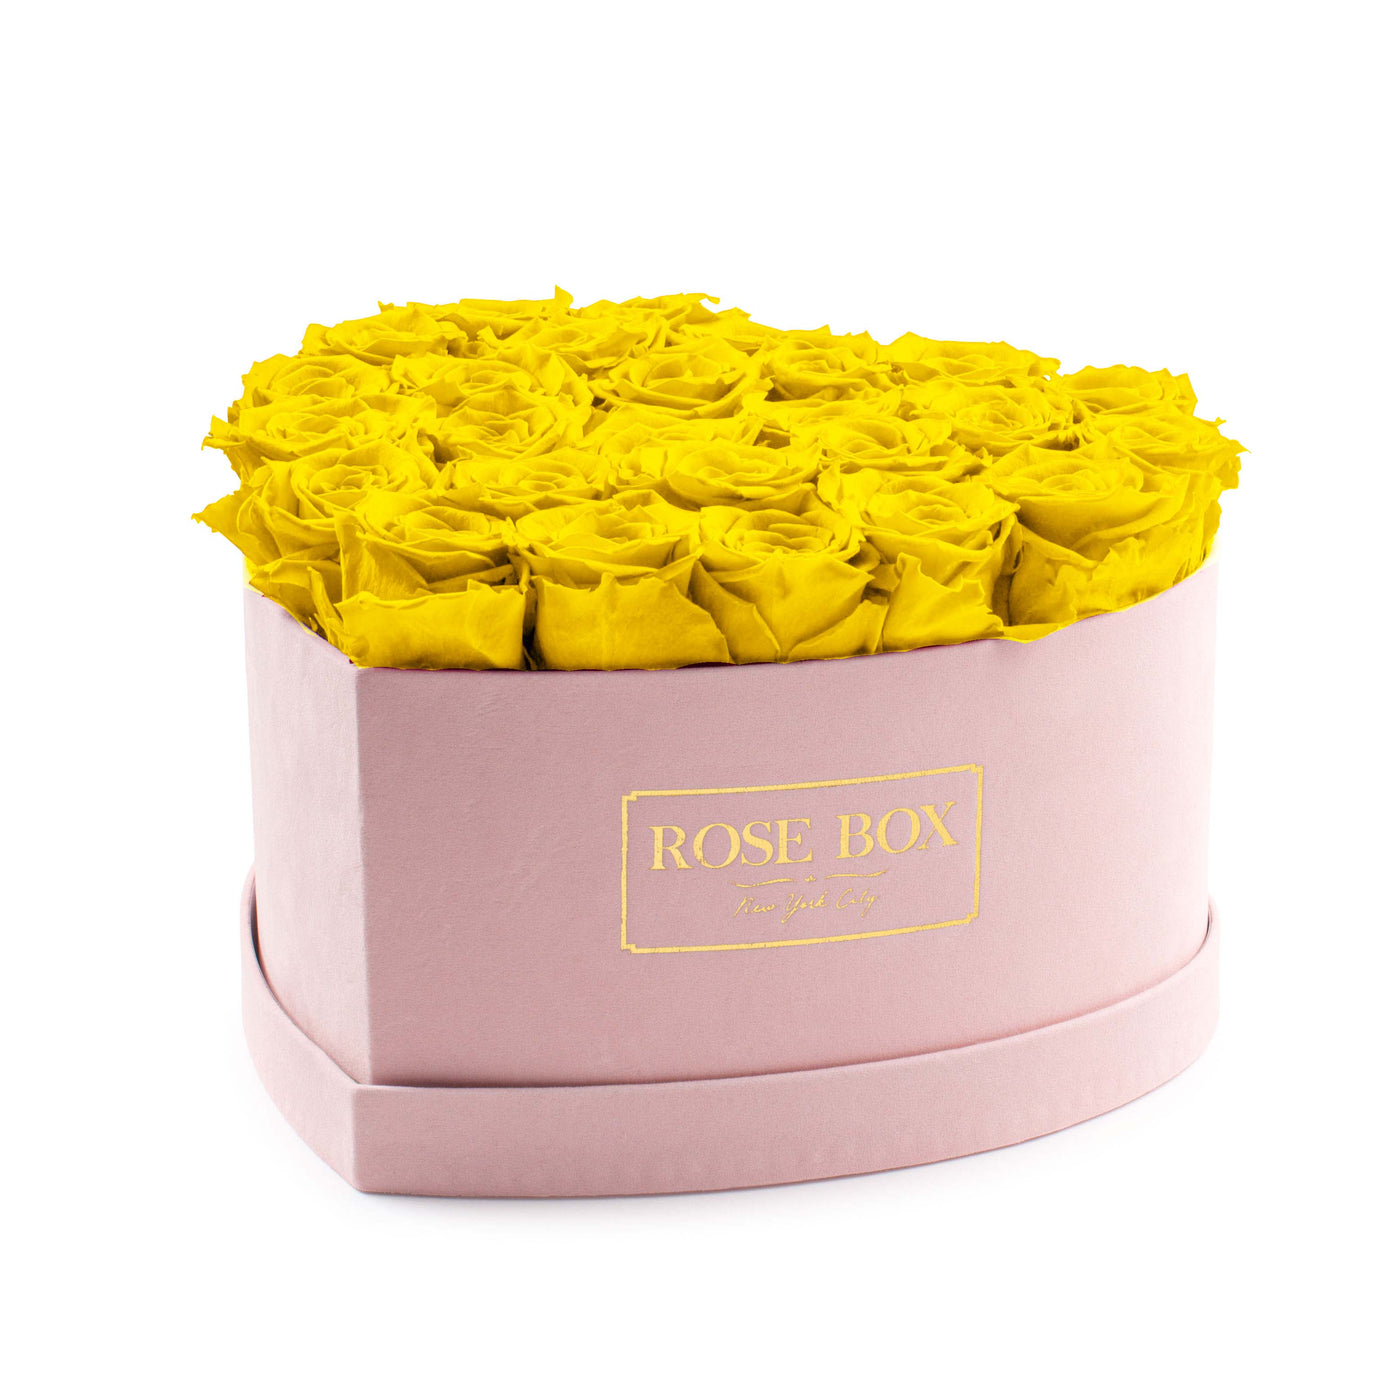 Large Heart Light Pink Box with Bright Yellow Roses